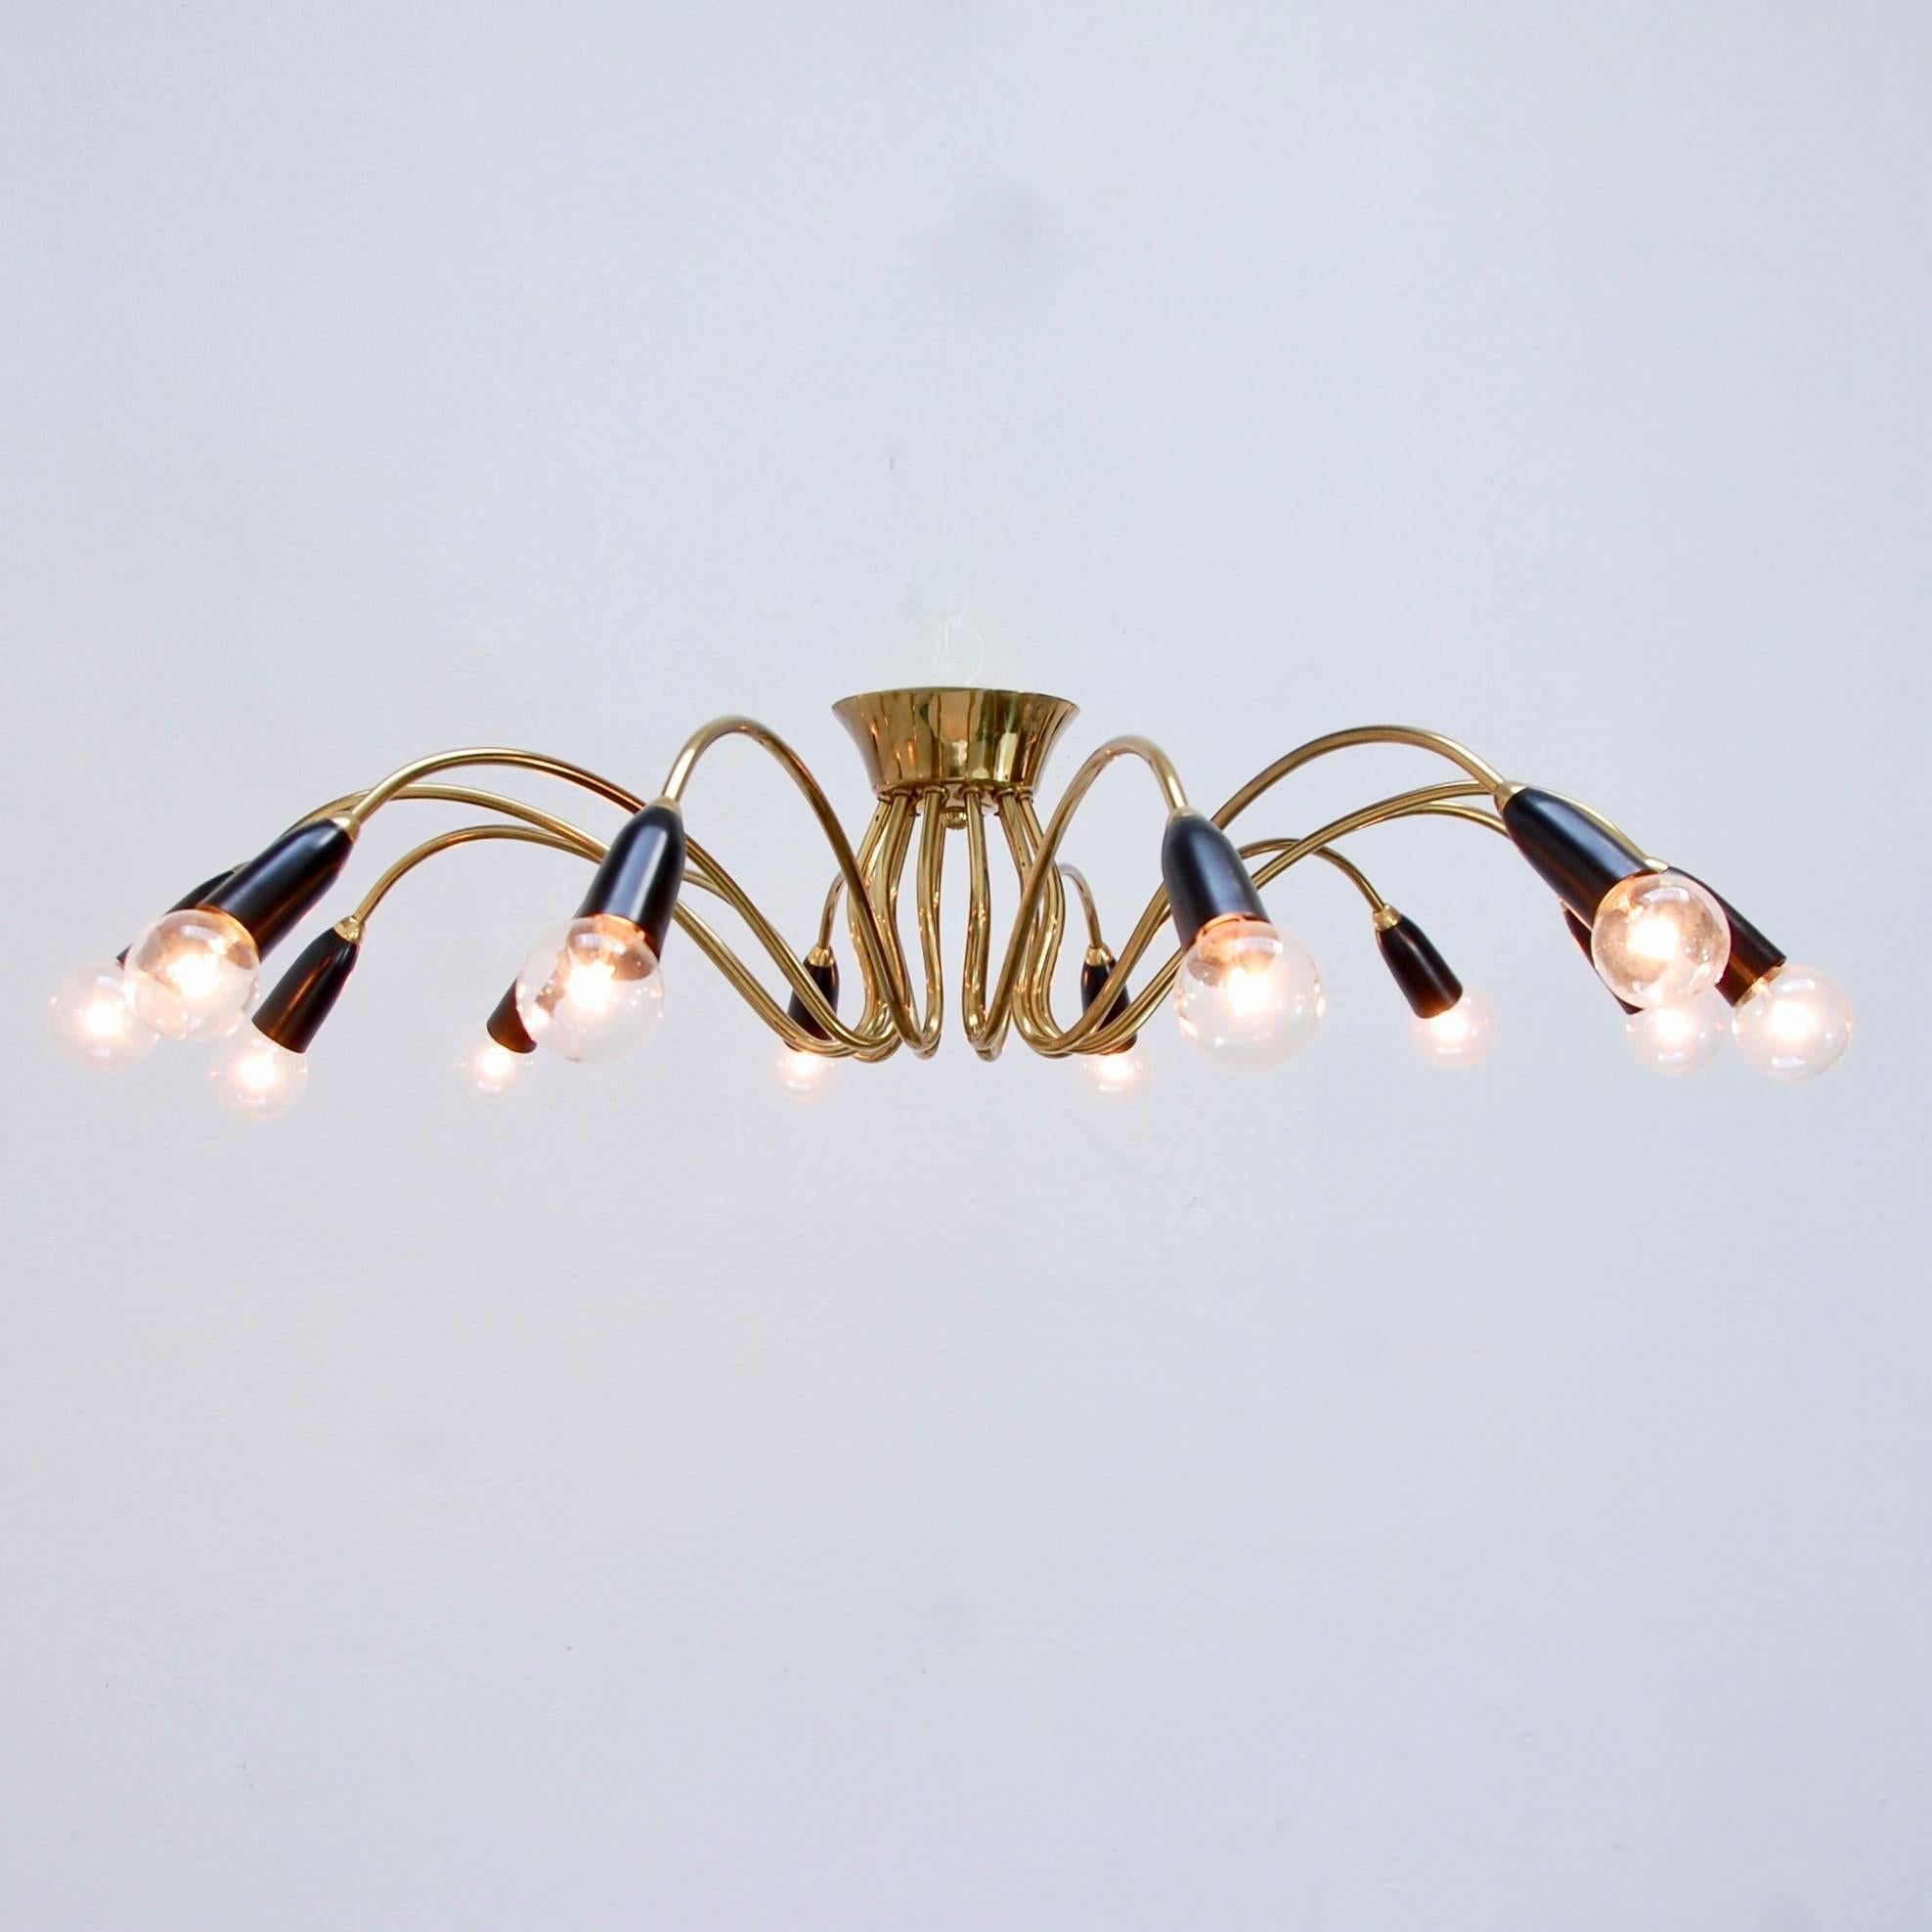 Graceful 12-arm German flush mount light fixture from the 1950s. Restored and rewired for use in the US. Patina lacquered brass finish. Candelabra based E12 sockets.